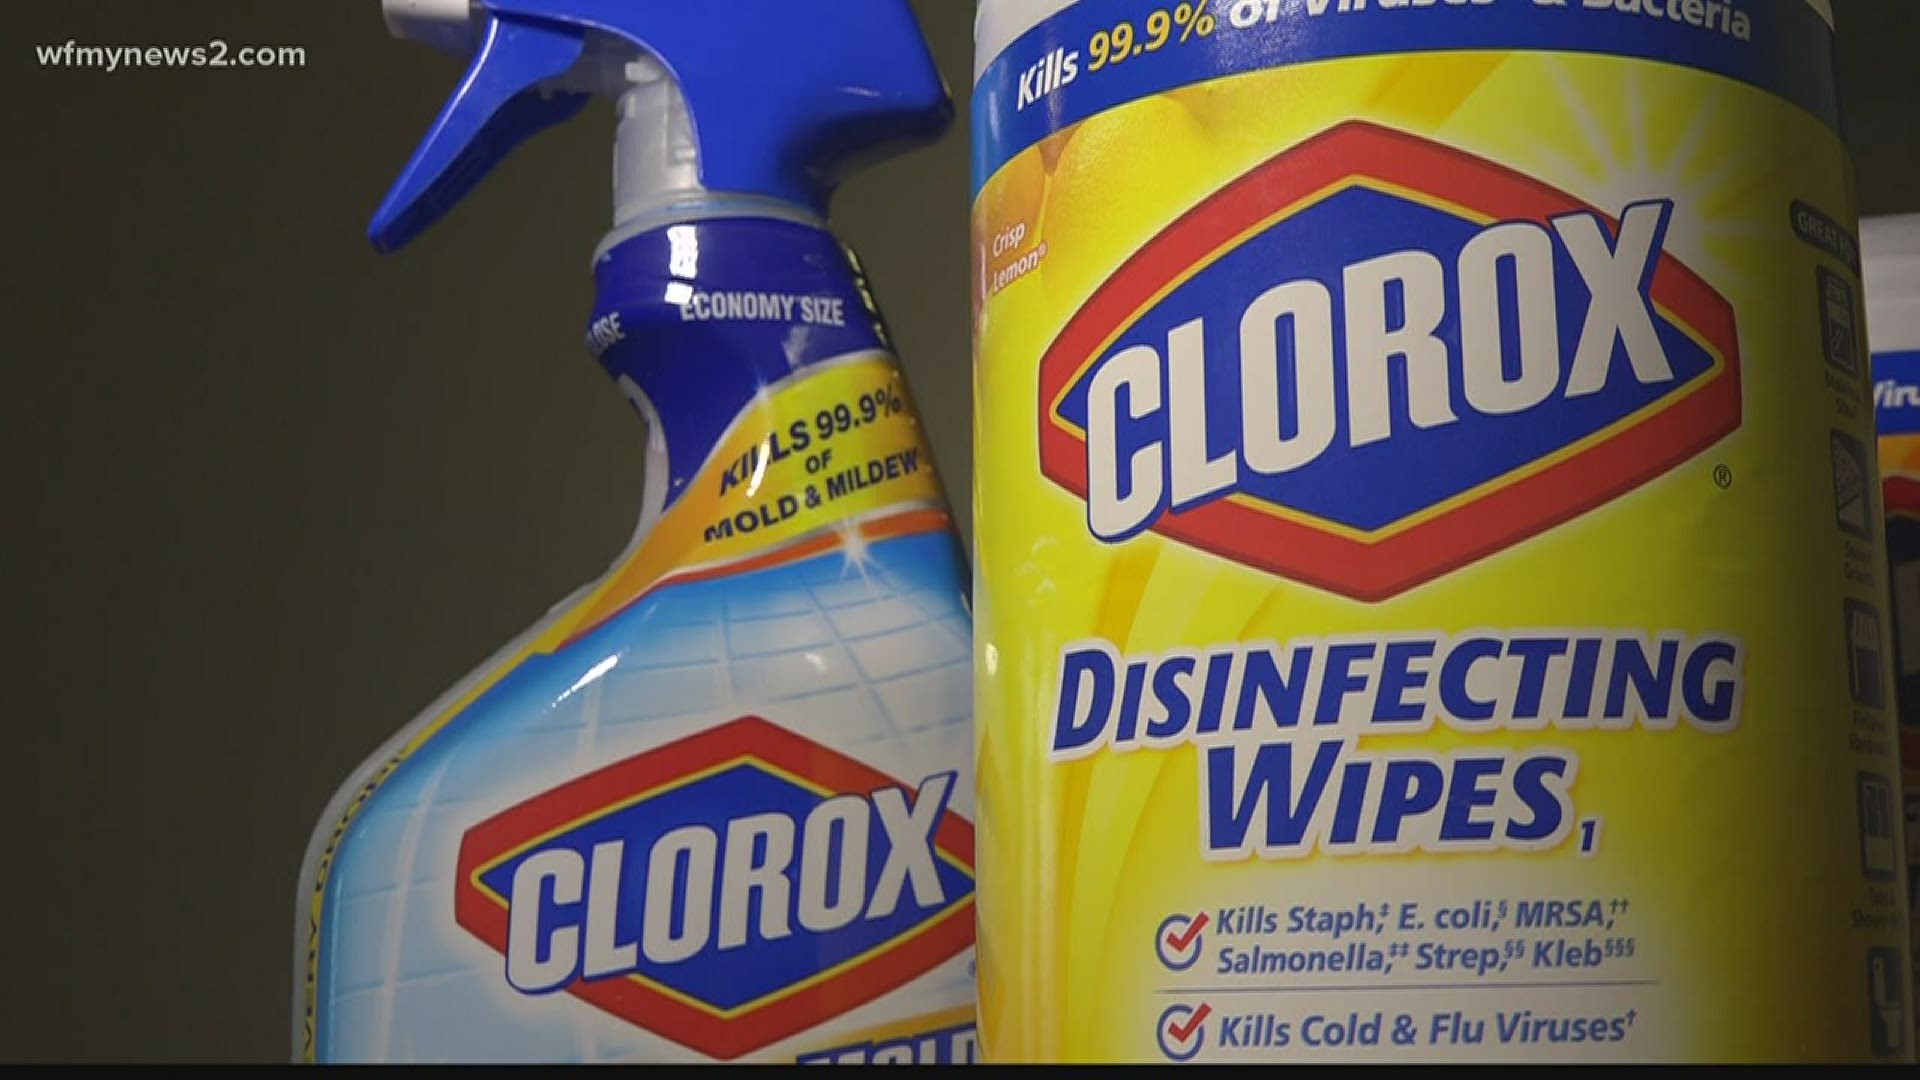 The CDC says calls to U.S. poison centers about cleaner and disinfectant exposures increased by 20% over the past three months.